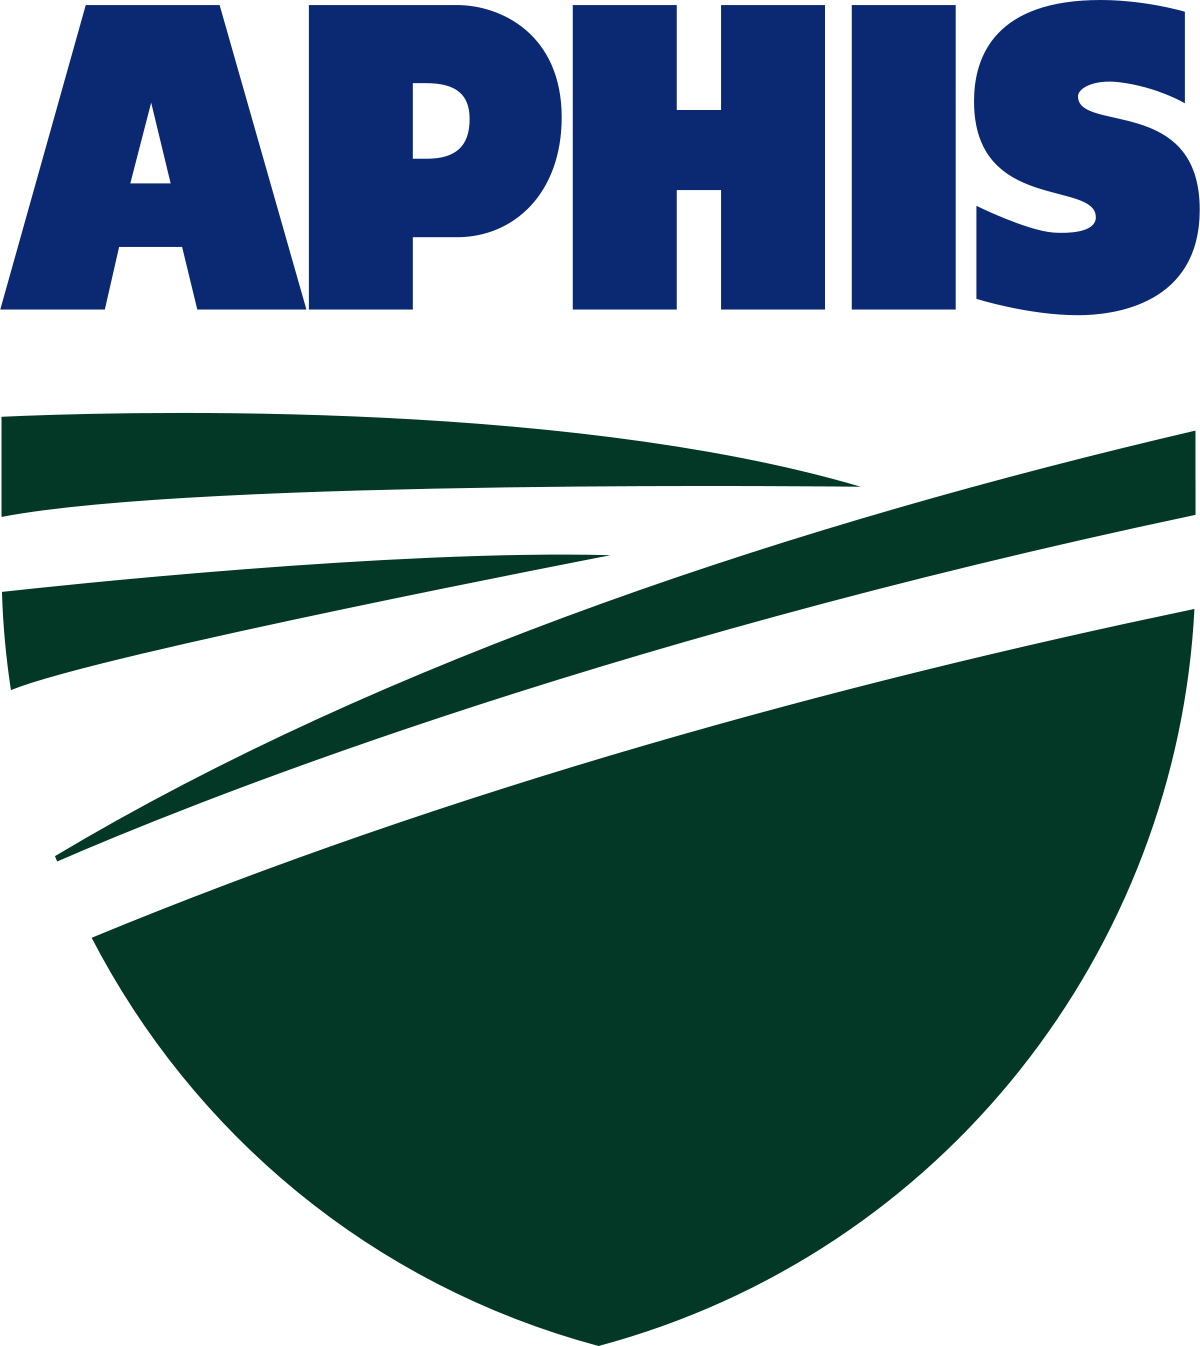 USDA APHIS (Animal and Plant Health Inspection Service) Approved